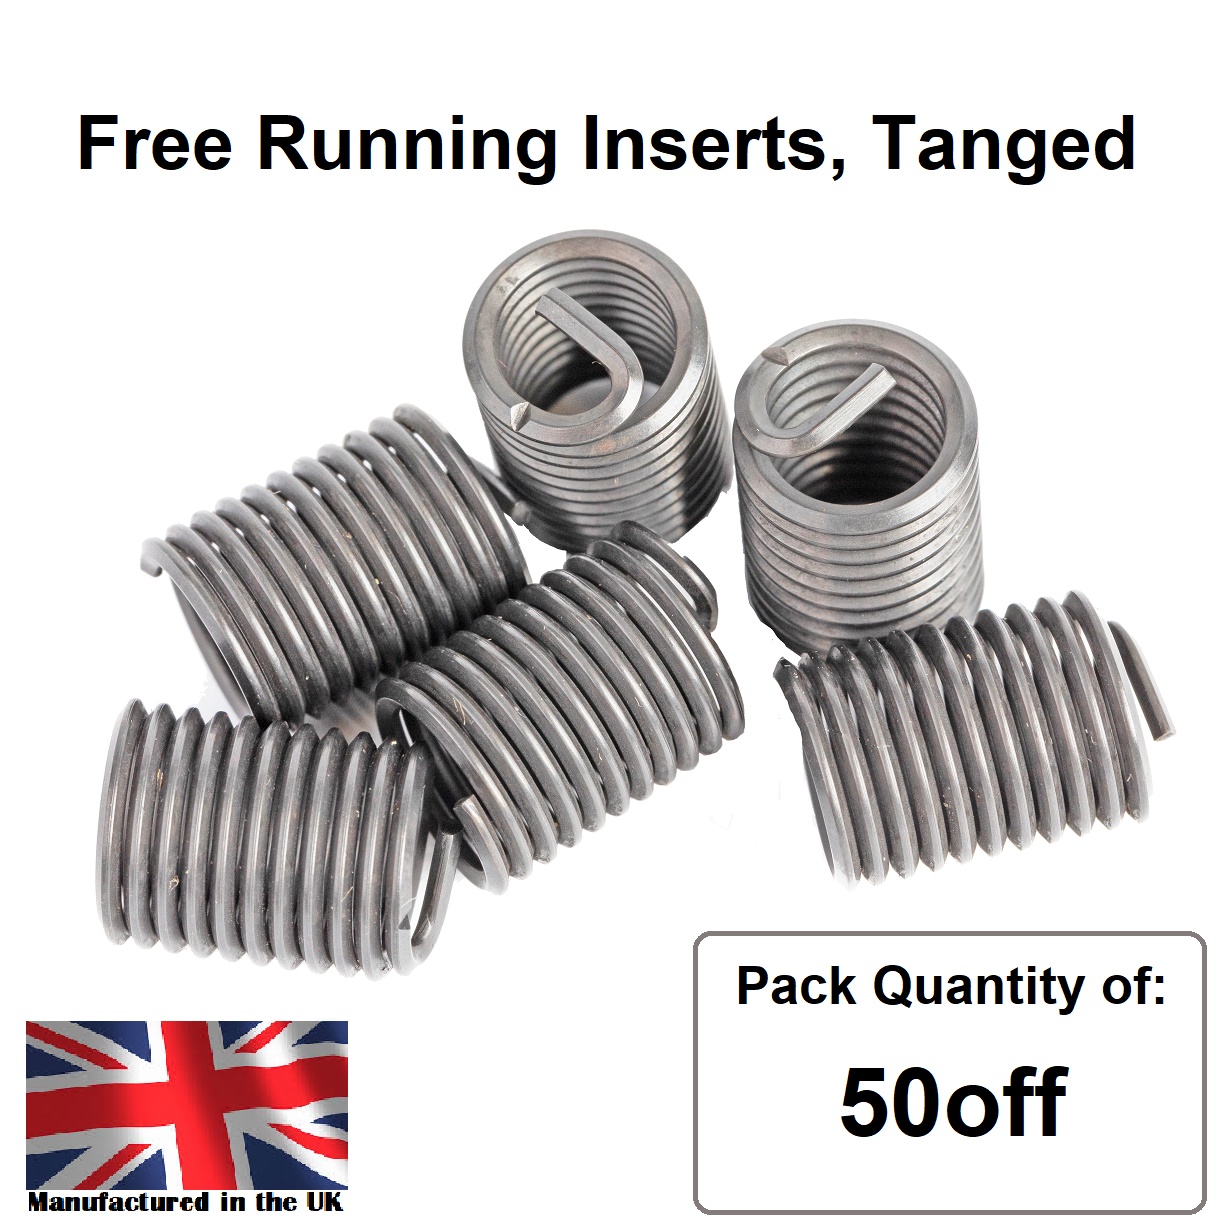 1/4 x 28 x 3D UNF, Free Running, Tanged, Wire Thread Repair Insert, 304/A2 Stainless (Pack 50)